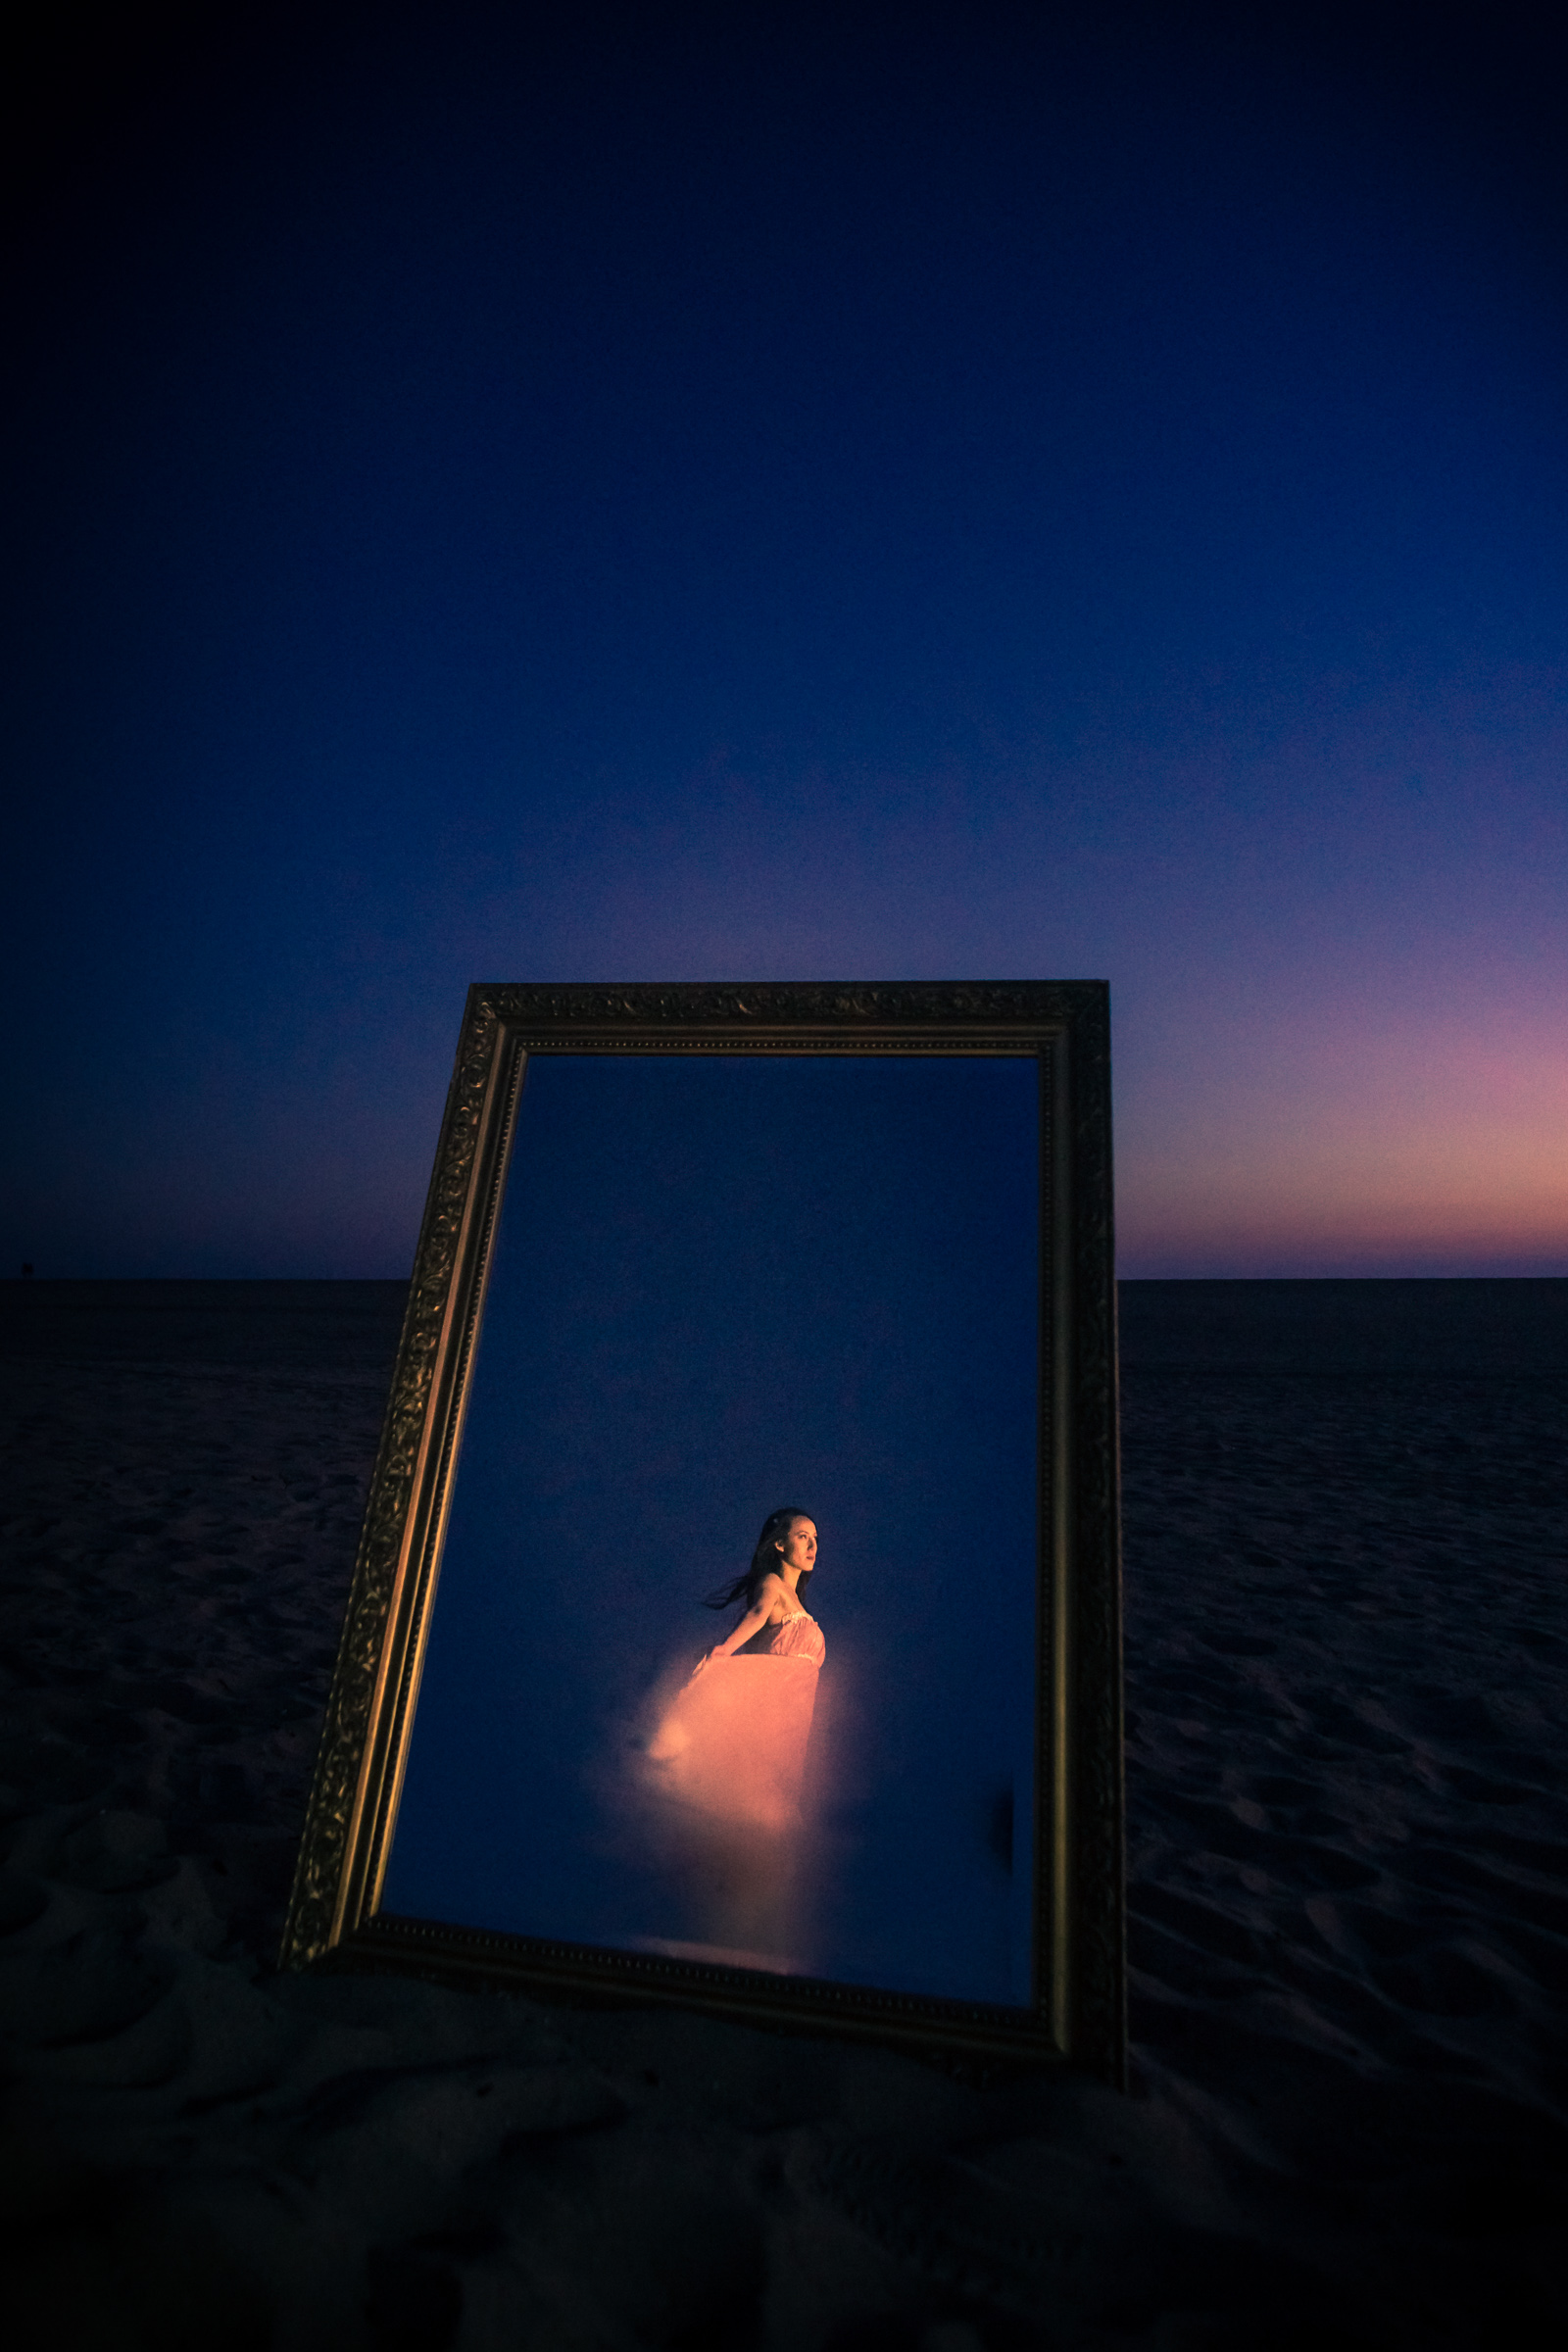 Experimental portrait with a vintage mirror with a lady a in a pink dress taken on the beach on Balboa Peninsula